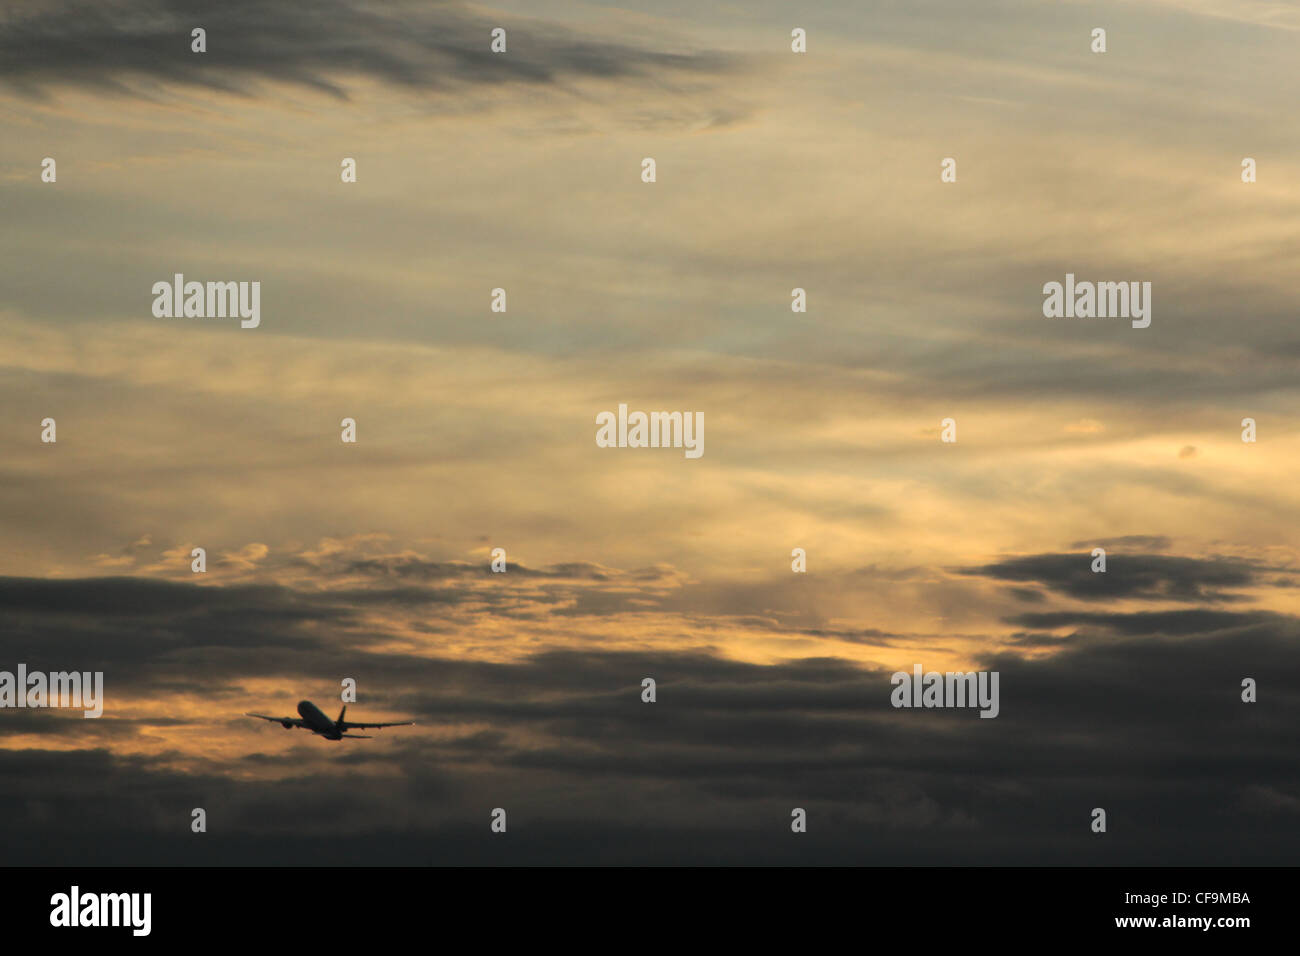 Silhouette of a plane flying away in the cloudy dusk sky Stock Photo